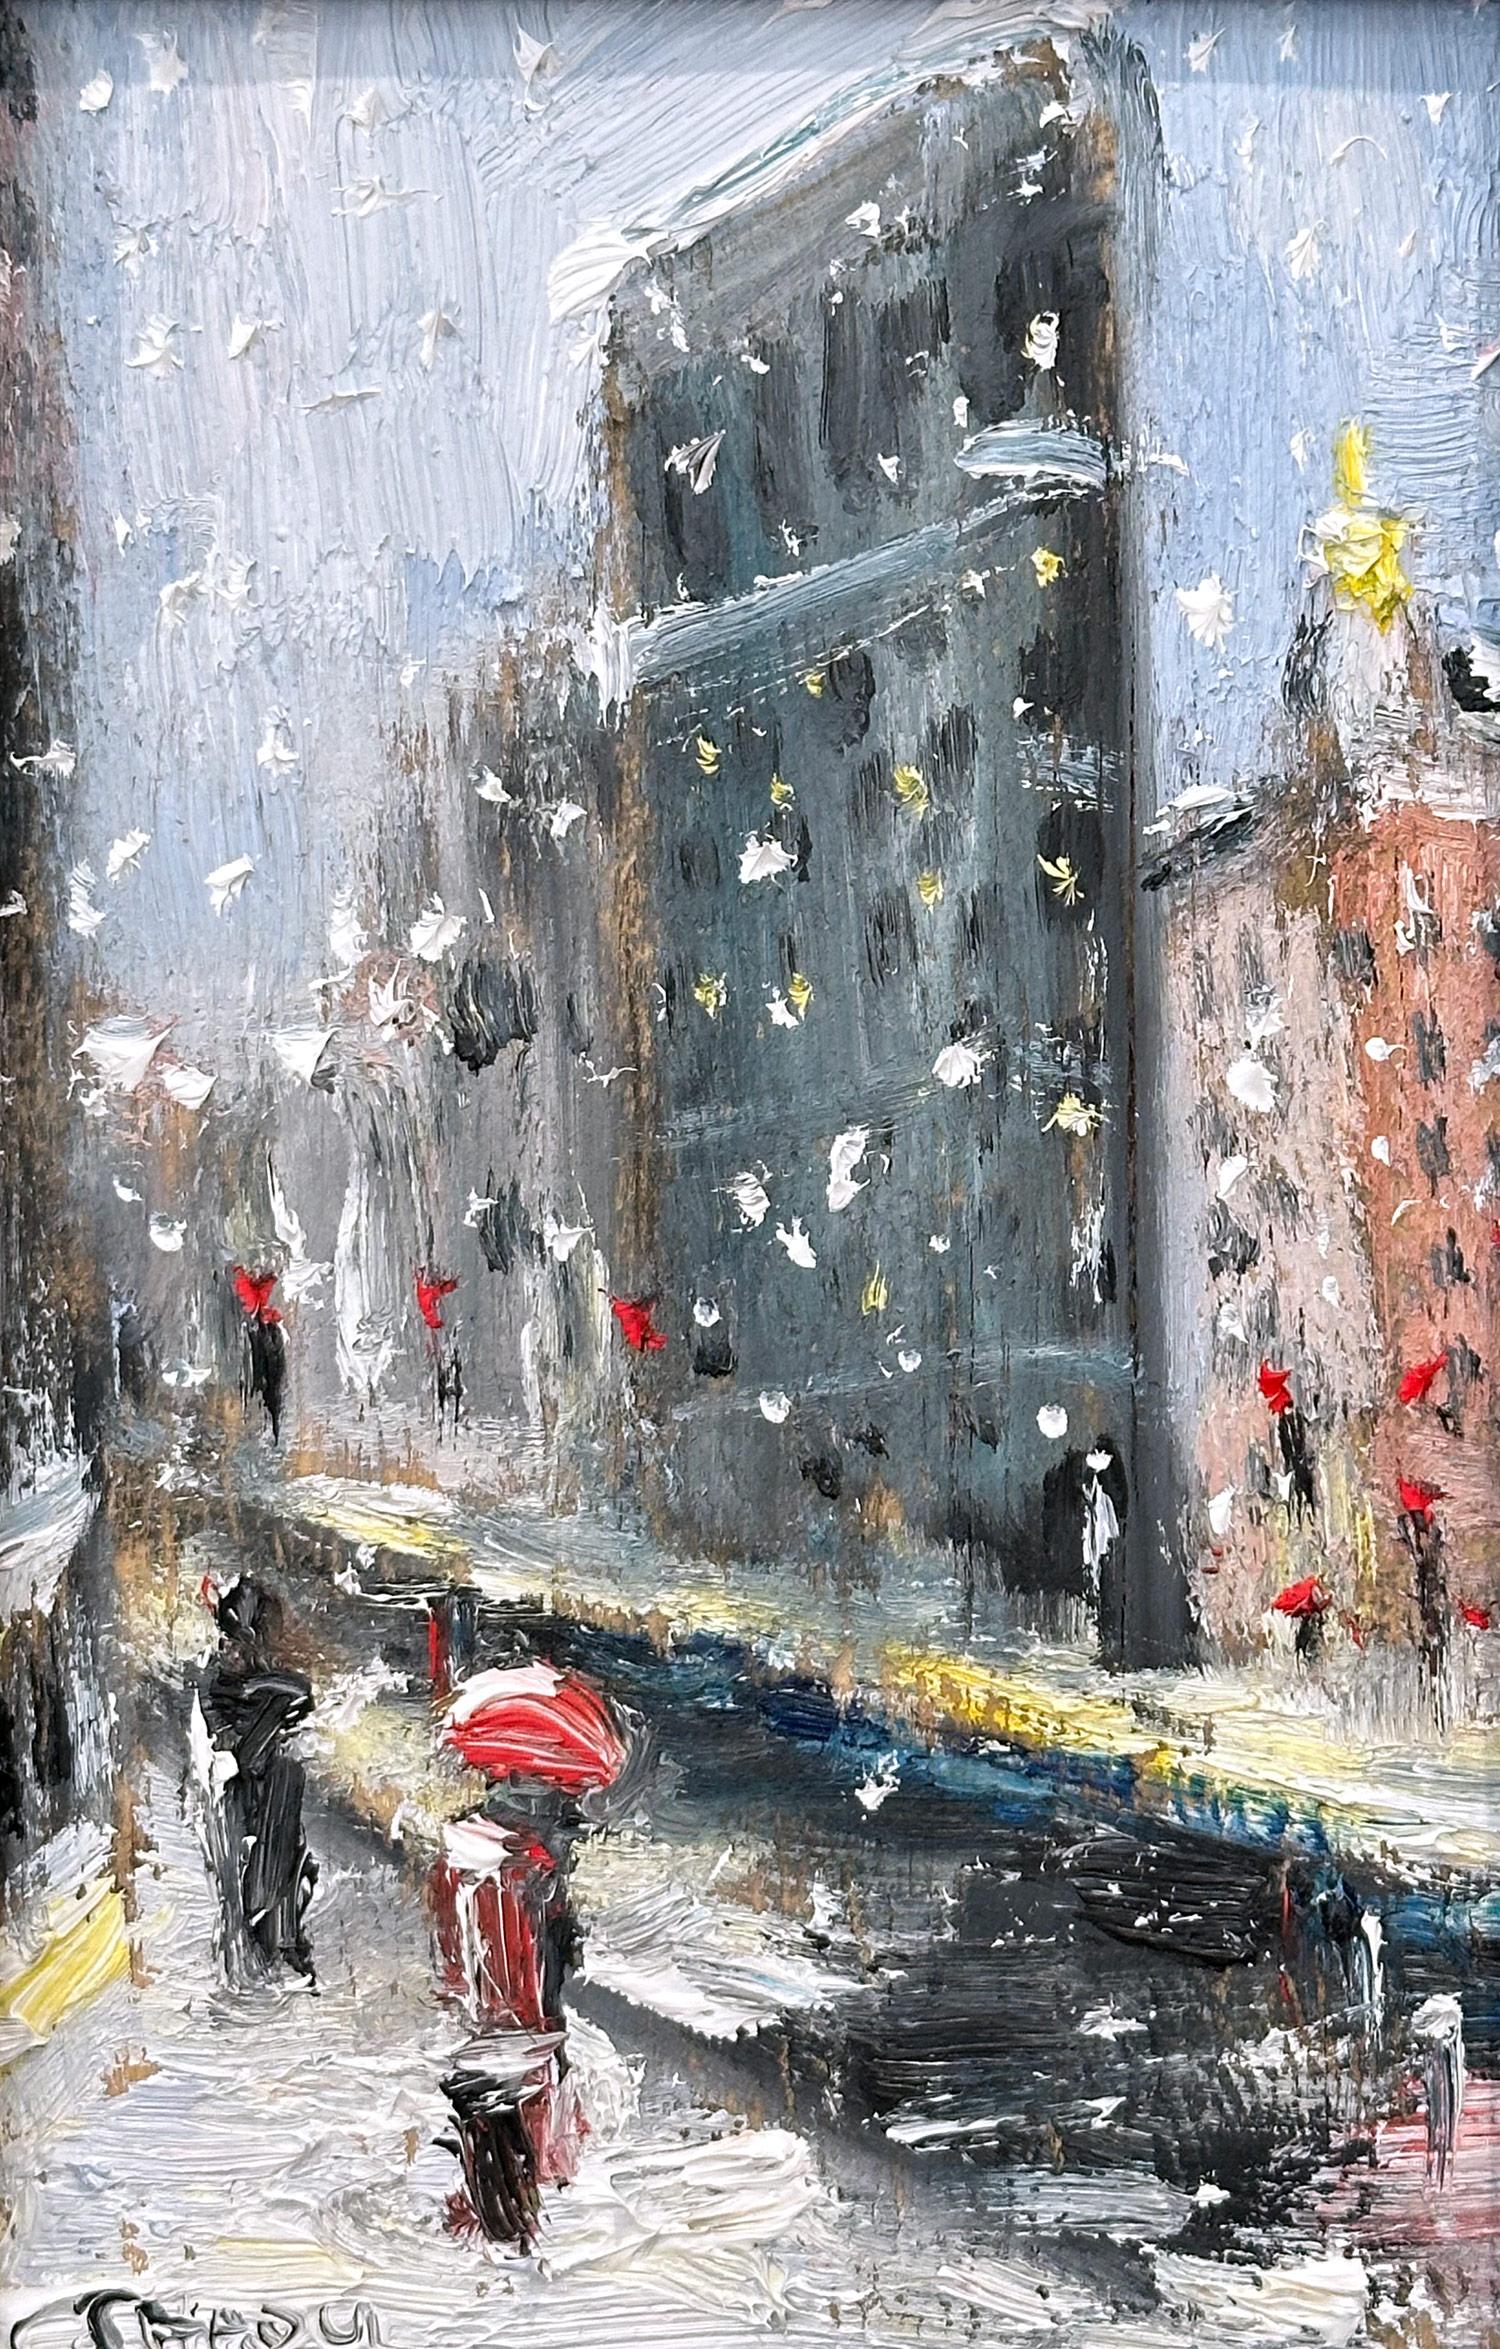 This painting depicts an impressionistic scene of a figure with an umbrella in a Snow Filled NYC streets by the Flatiron on 5th Avenue. The thick brush strokes and fun marks creates an atmosphere reminiscent of the impressionists from the 20th